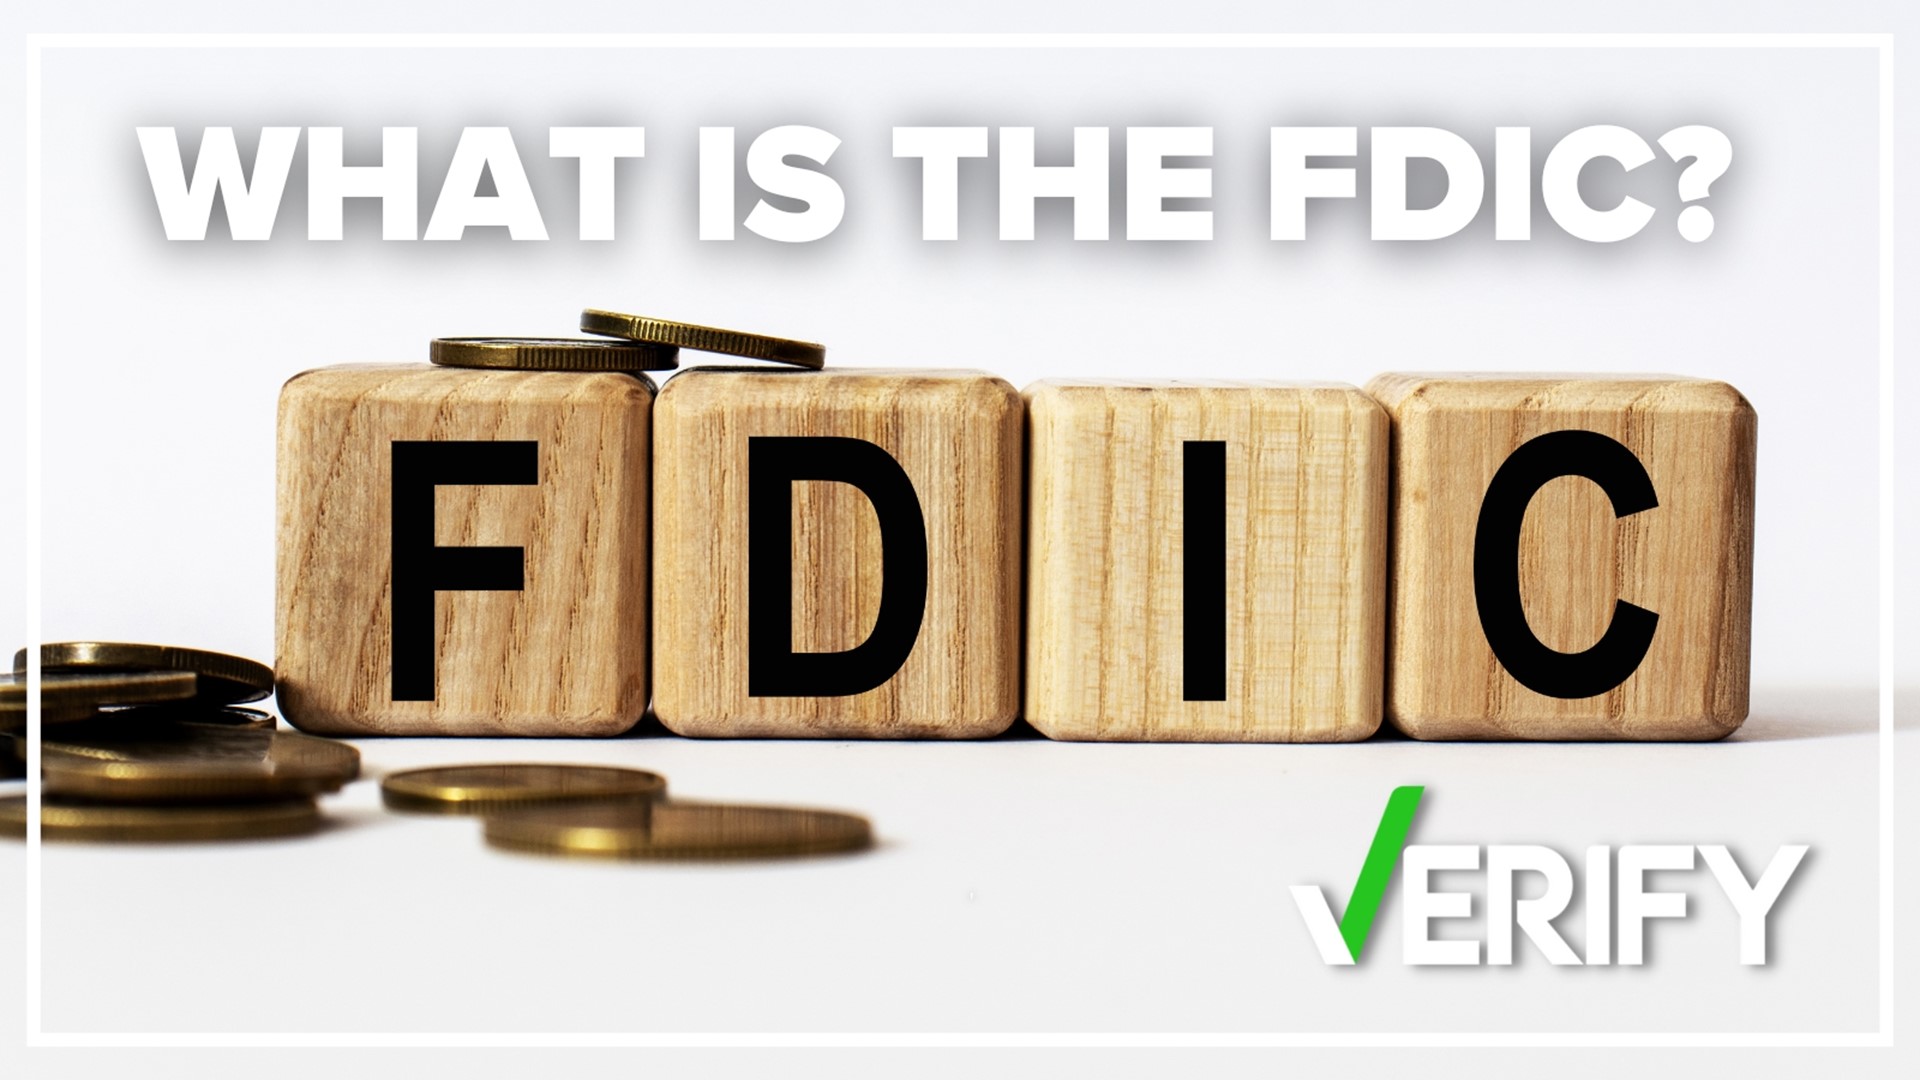 The FDIC has been around since the 1930s. It's a government-backed corporation that helps people get their money back, up to $250,000.